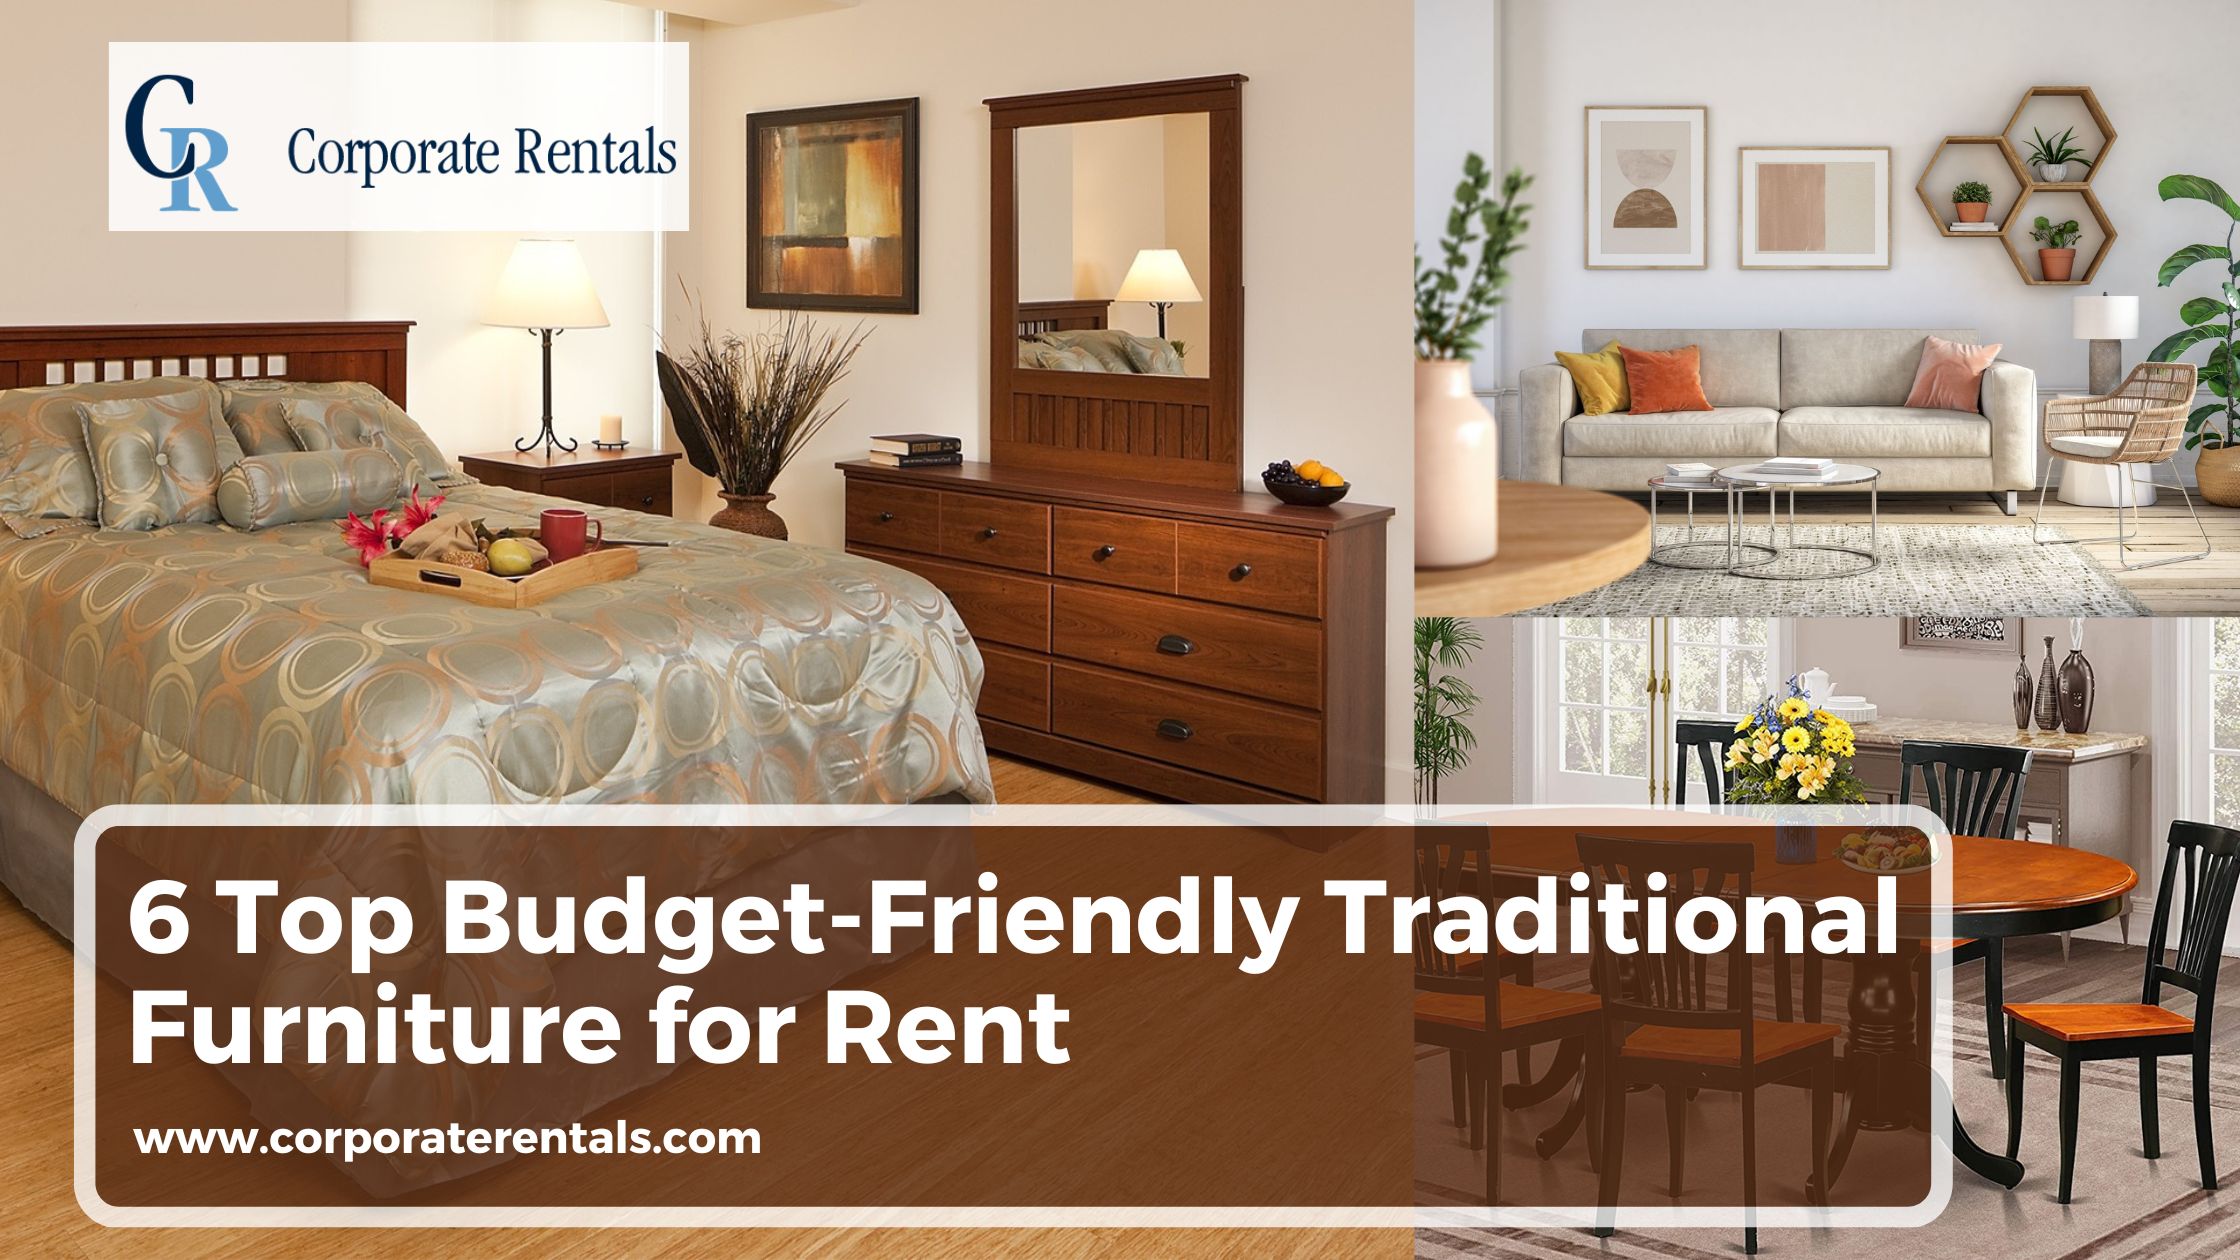 6 Top Budget-Friendly Traditional Furniture for Rent